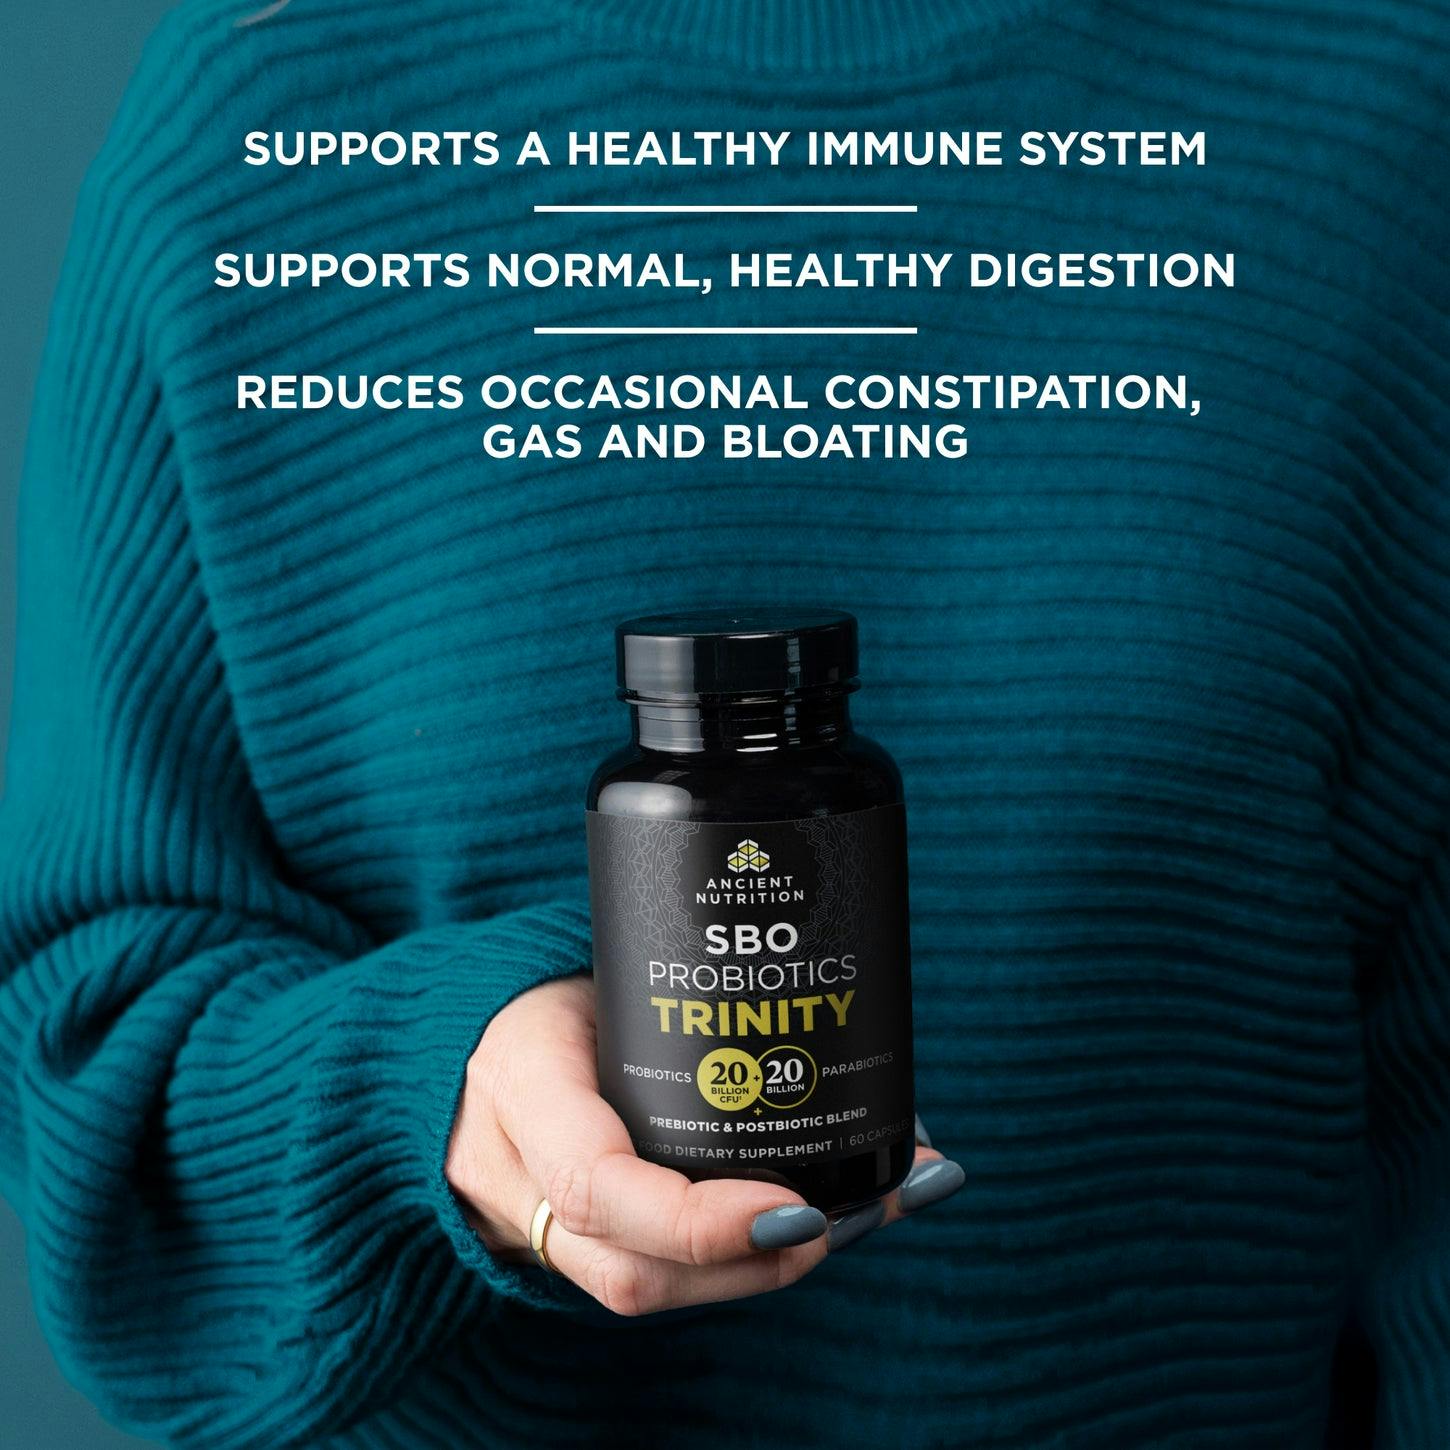 SBO Probiotics Trinity Capsules in a persons hand